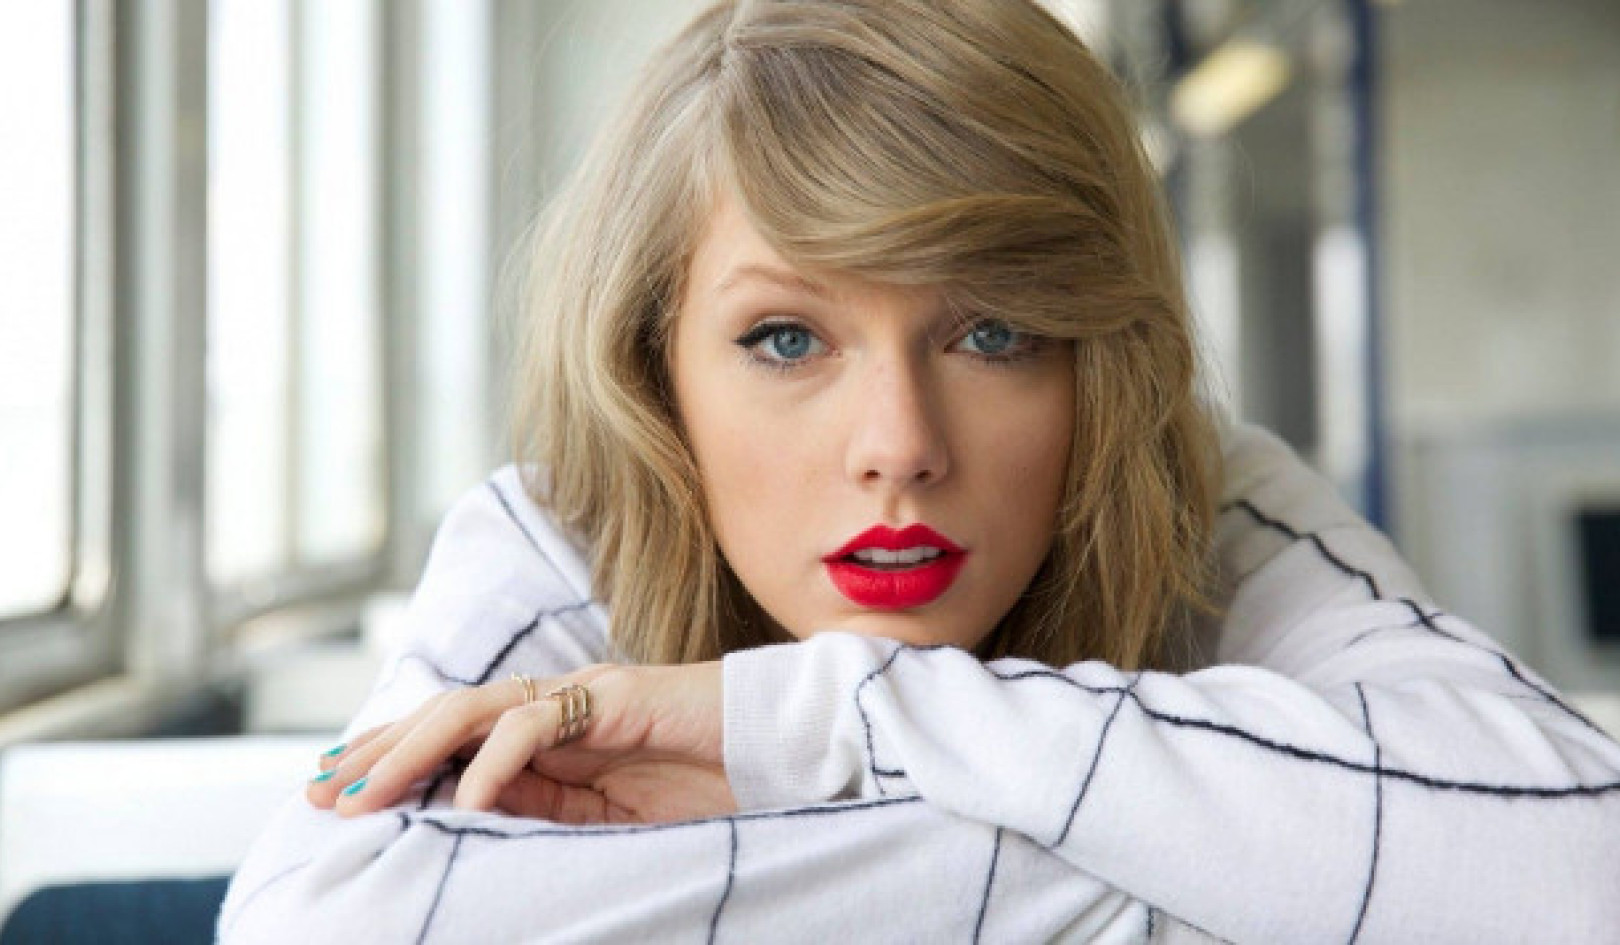 Behind the Hype: The Ongoing Reign of Taylor Swift